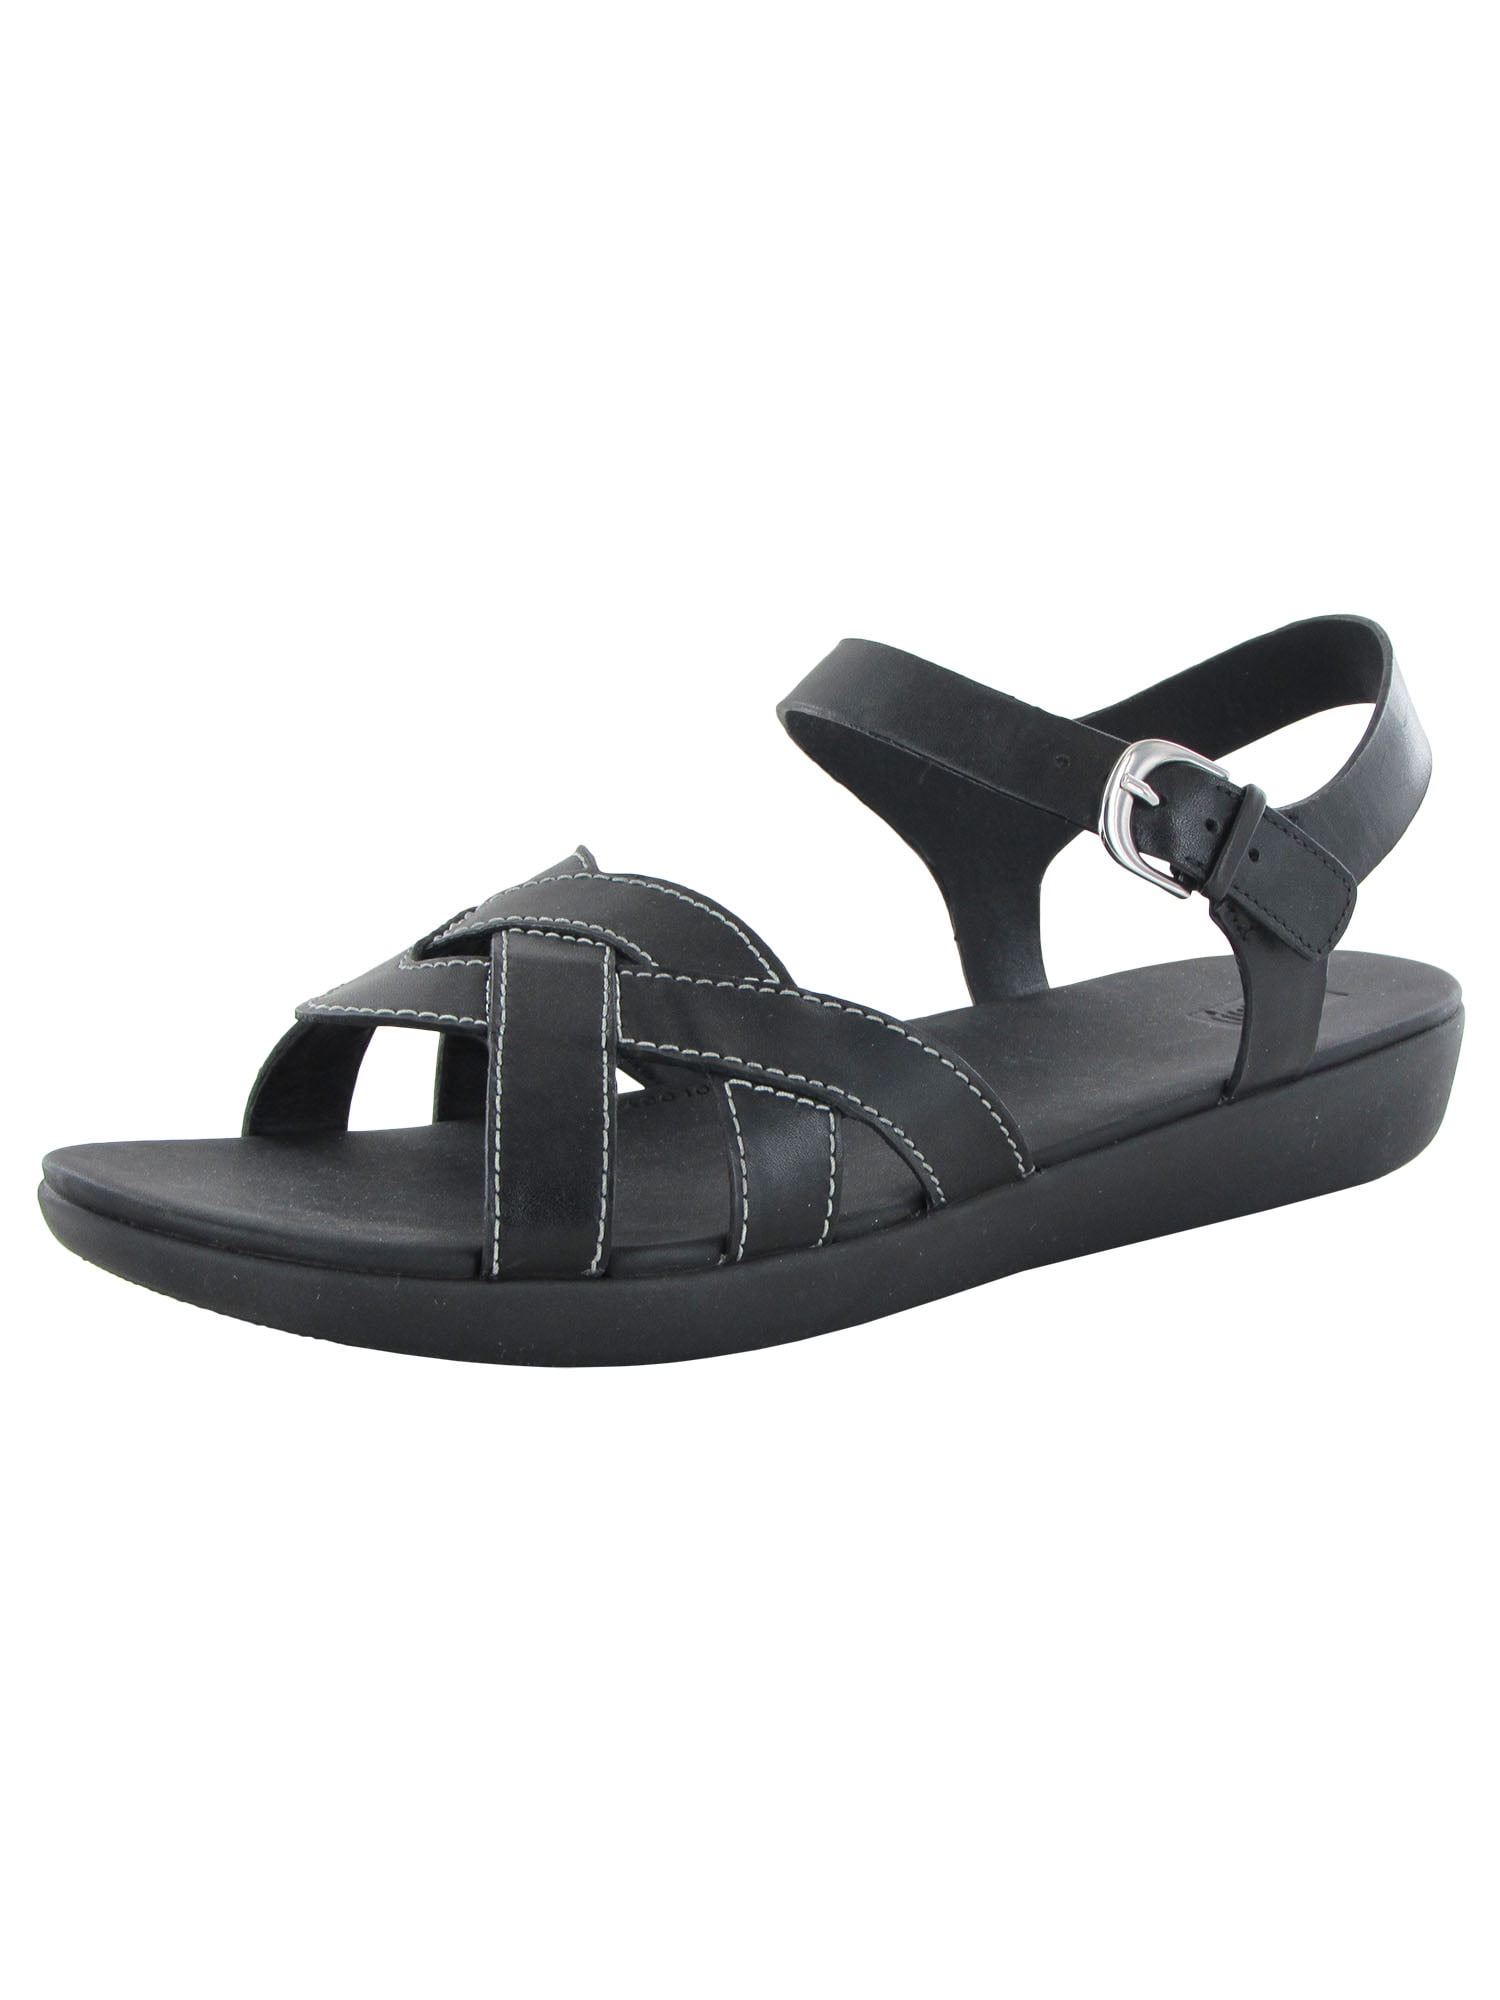 Fitflop Womens Elyna Weave Back Strap Sandal Shoes, All Black, US 9 ...